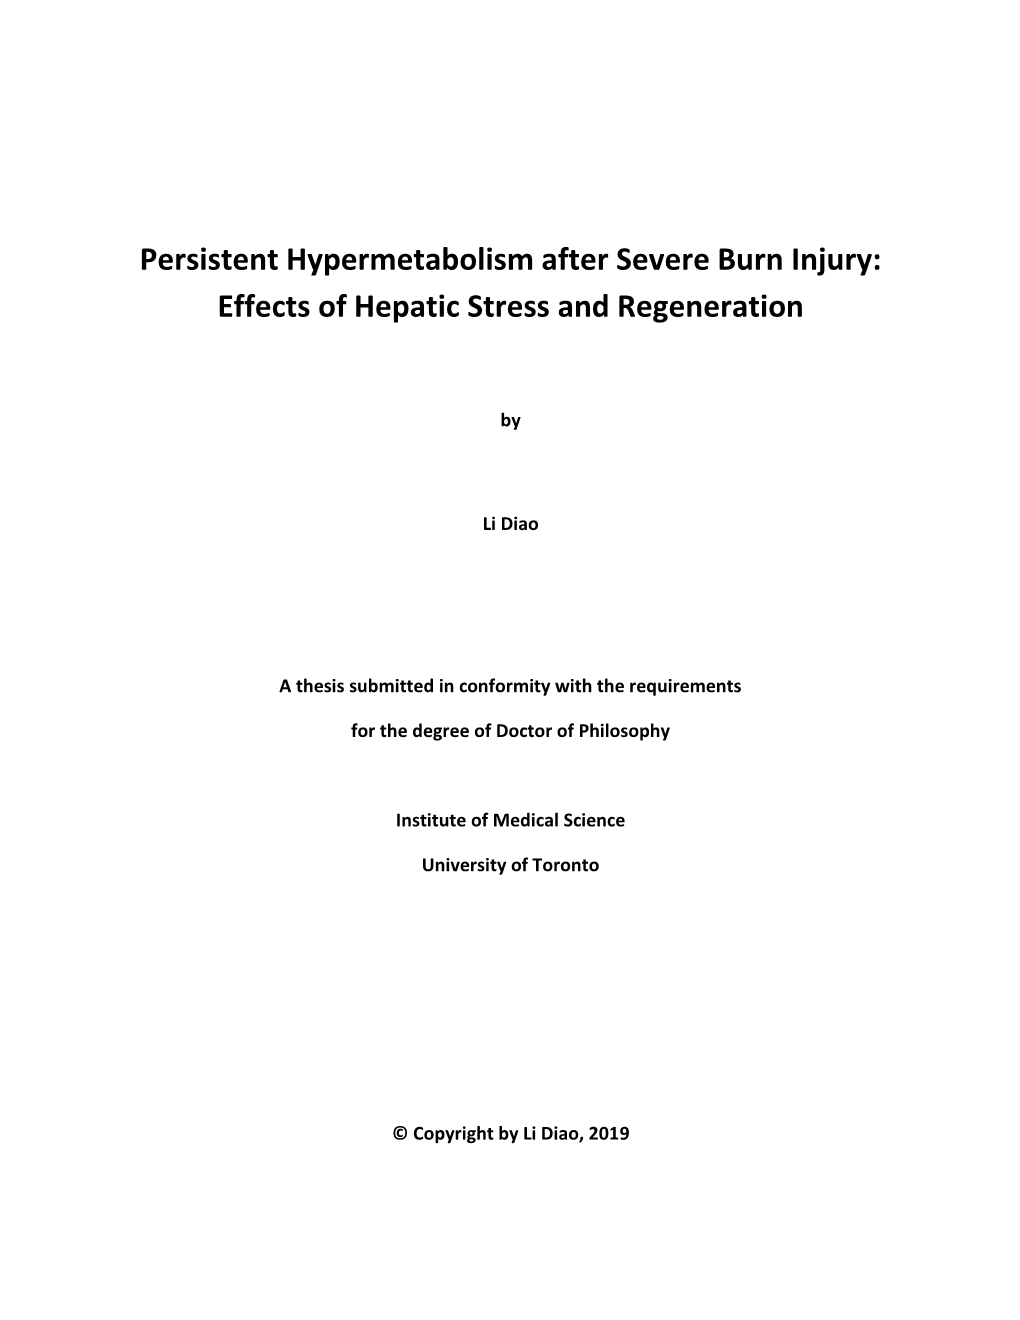 Persistent Hypermetabolism After Severe Burn Injury: Effects of Hepatic Stress and Regeneration